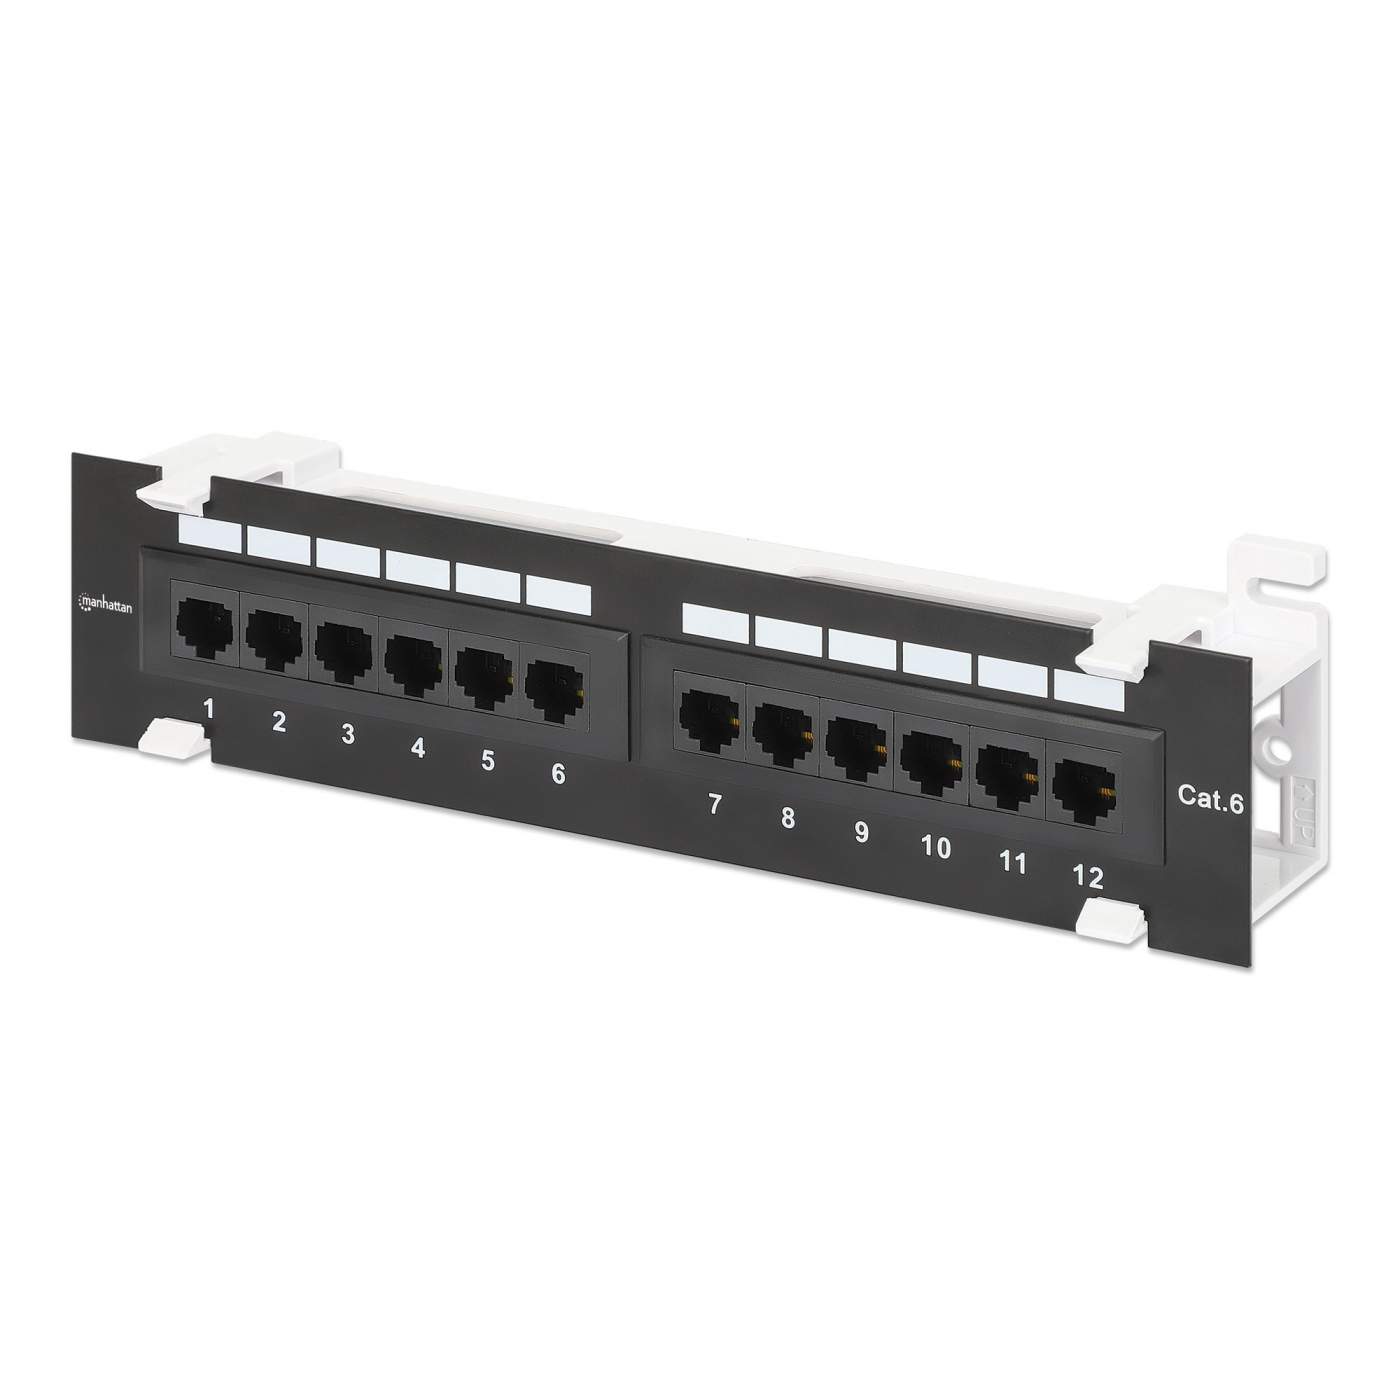 Cat6 Wall-mount Patch Panel Image 1